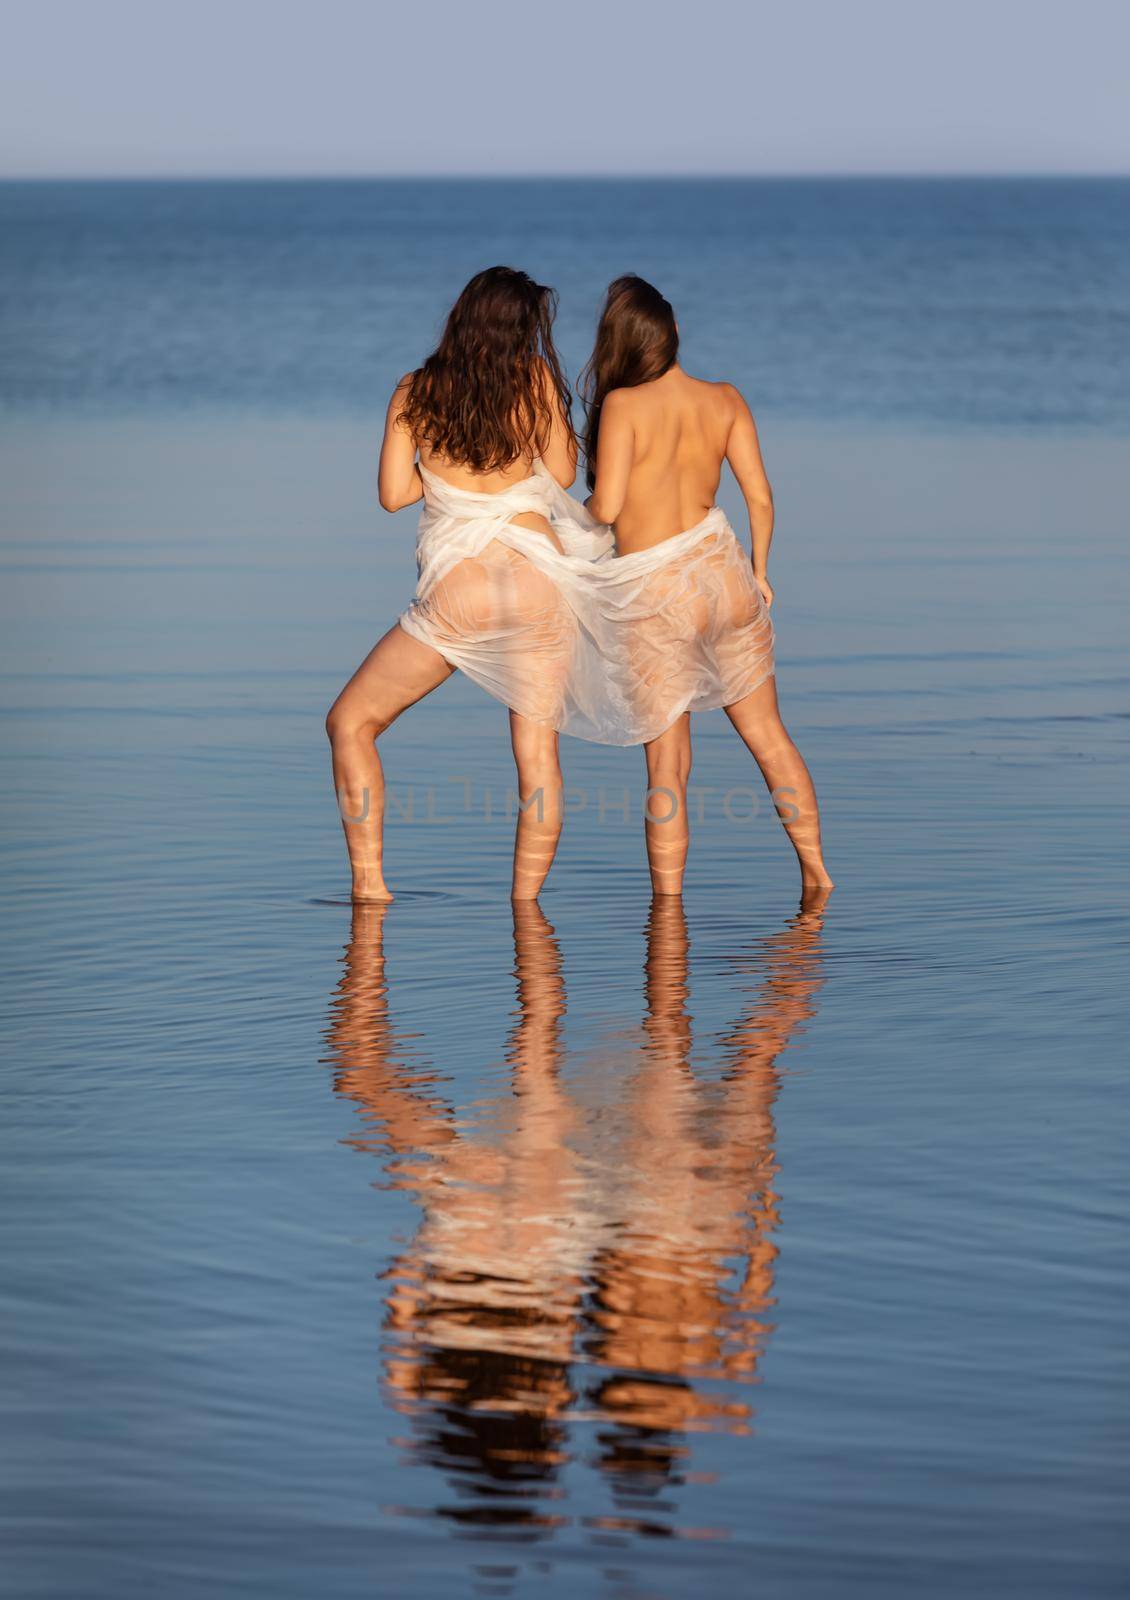 Beautiful naked girl outdoors enjoying nature. Two young nude women wrapped in white shawl posing on sea background. Sexy naked brunettes enjoying summer time outdoors. View from the back